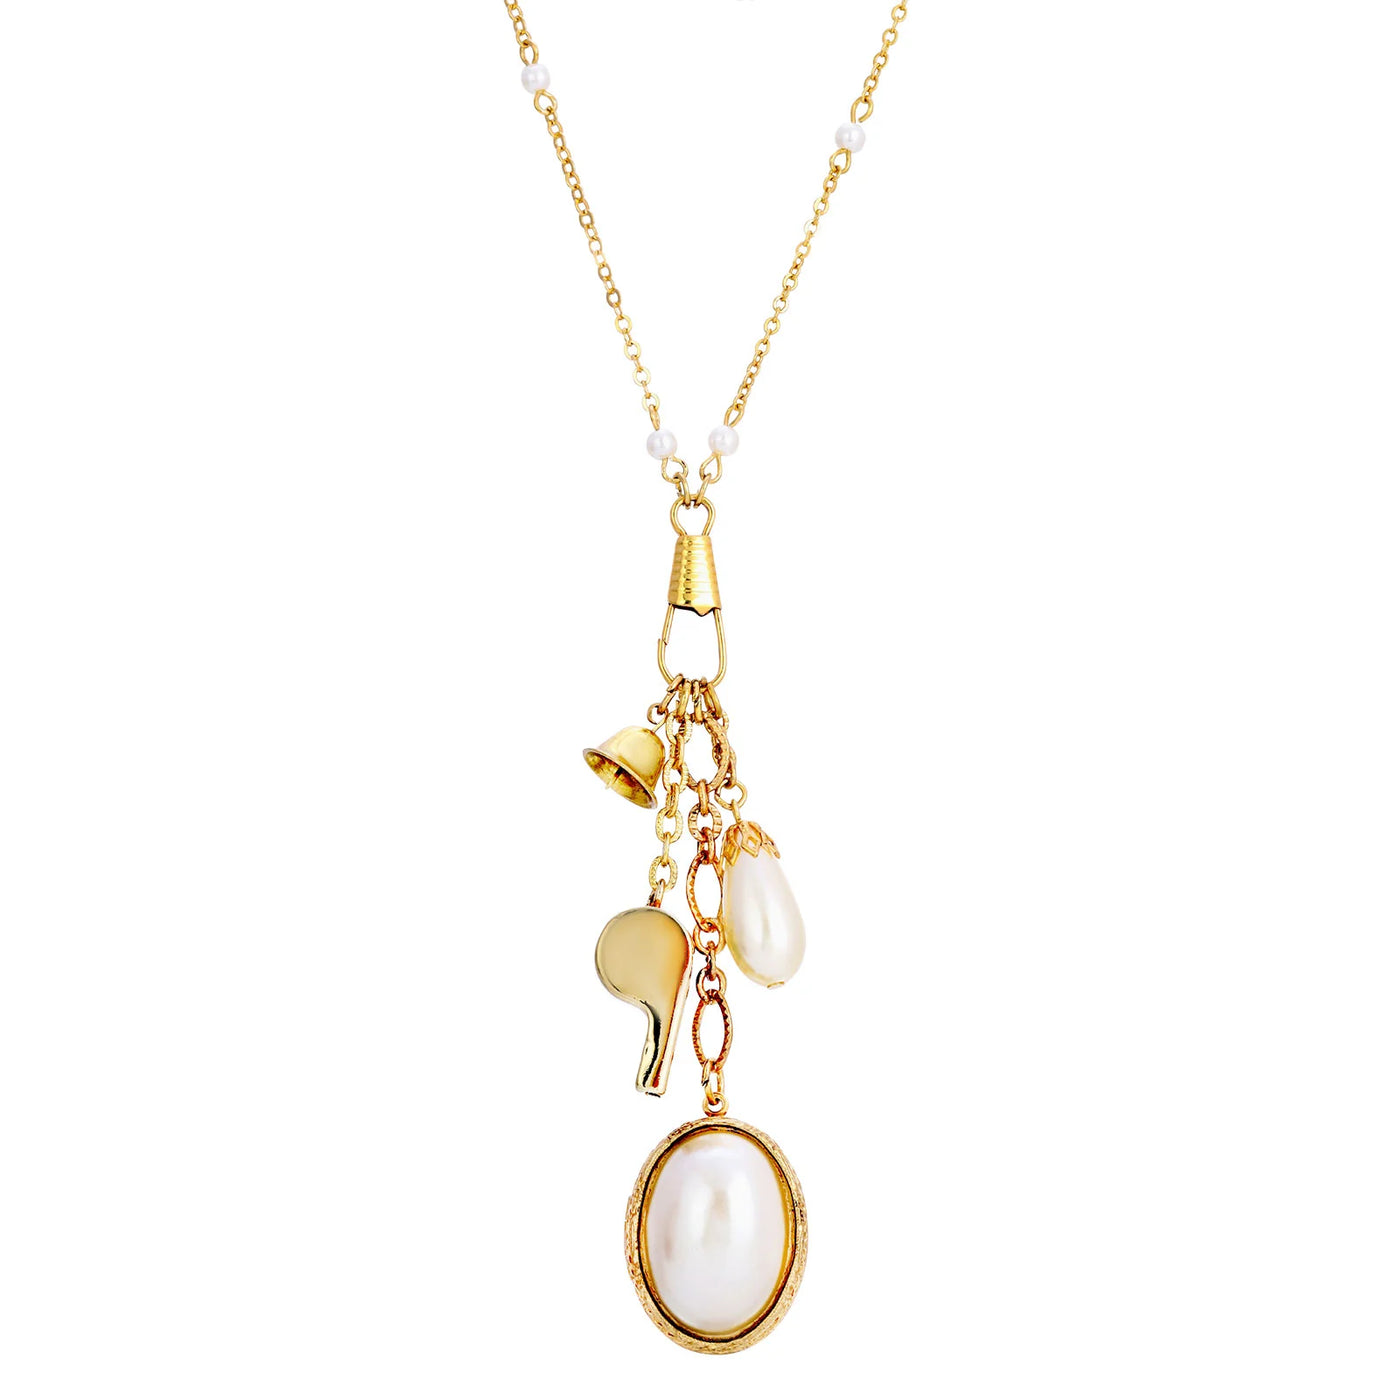 Elegant Faux Pearl Locket With Whistle Bell Charm Necklace